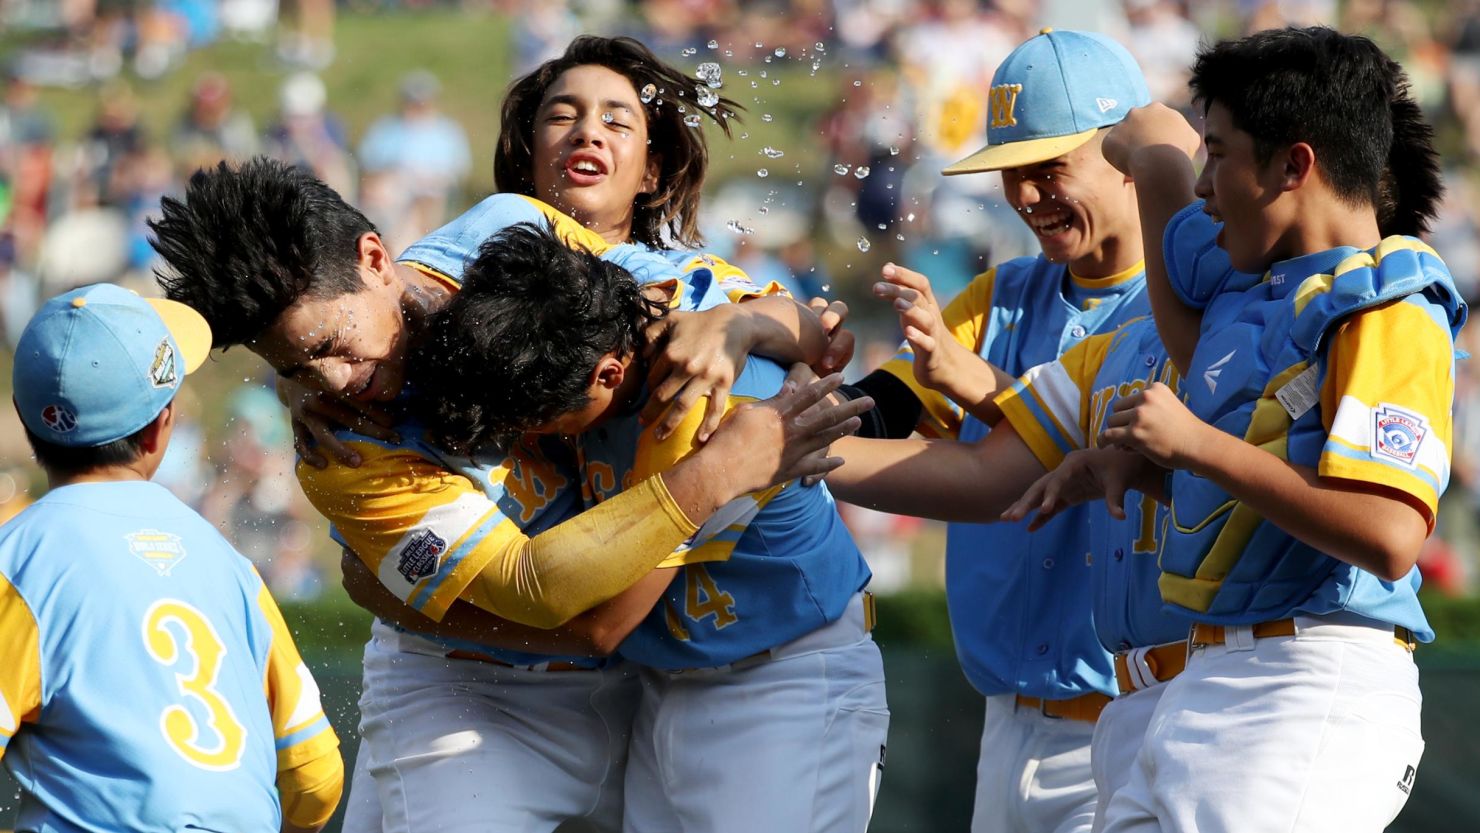 Hawaii celebrates a victory in the 2018 Little League World Series in South Williamsport, Pennsylvania.